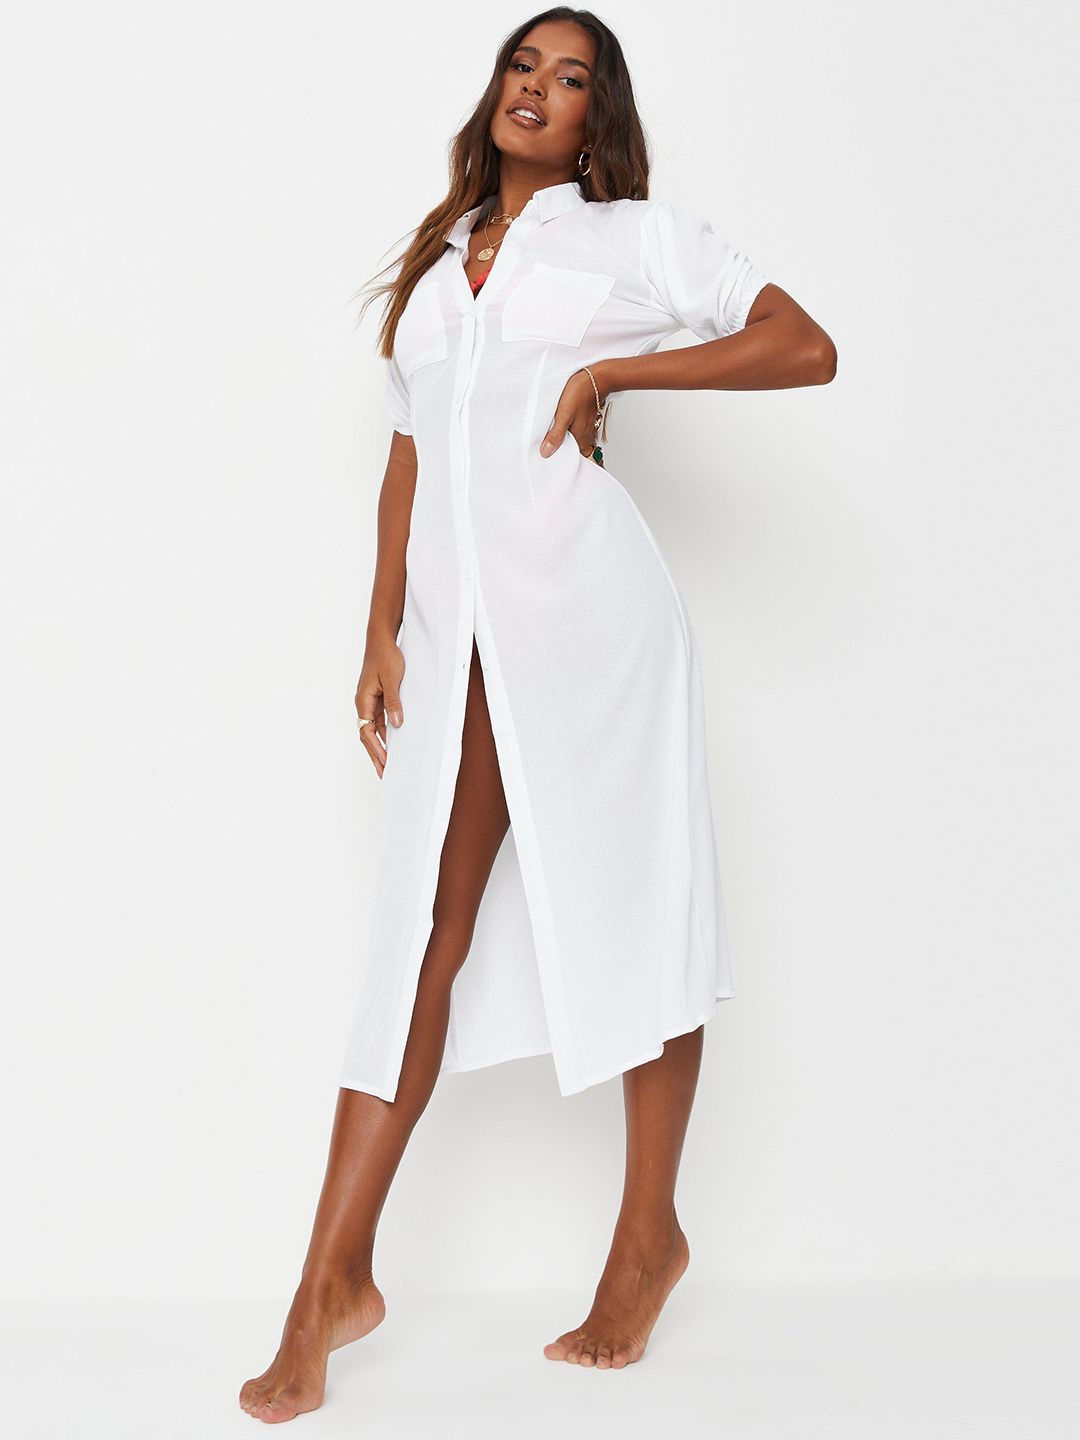 Missguided Women Off-White Solid Cover Up Shirt Style Dress Price in India